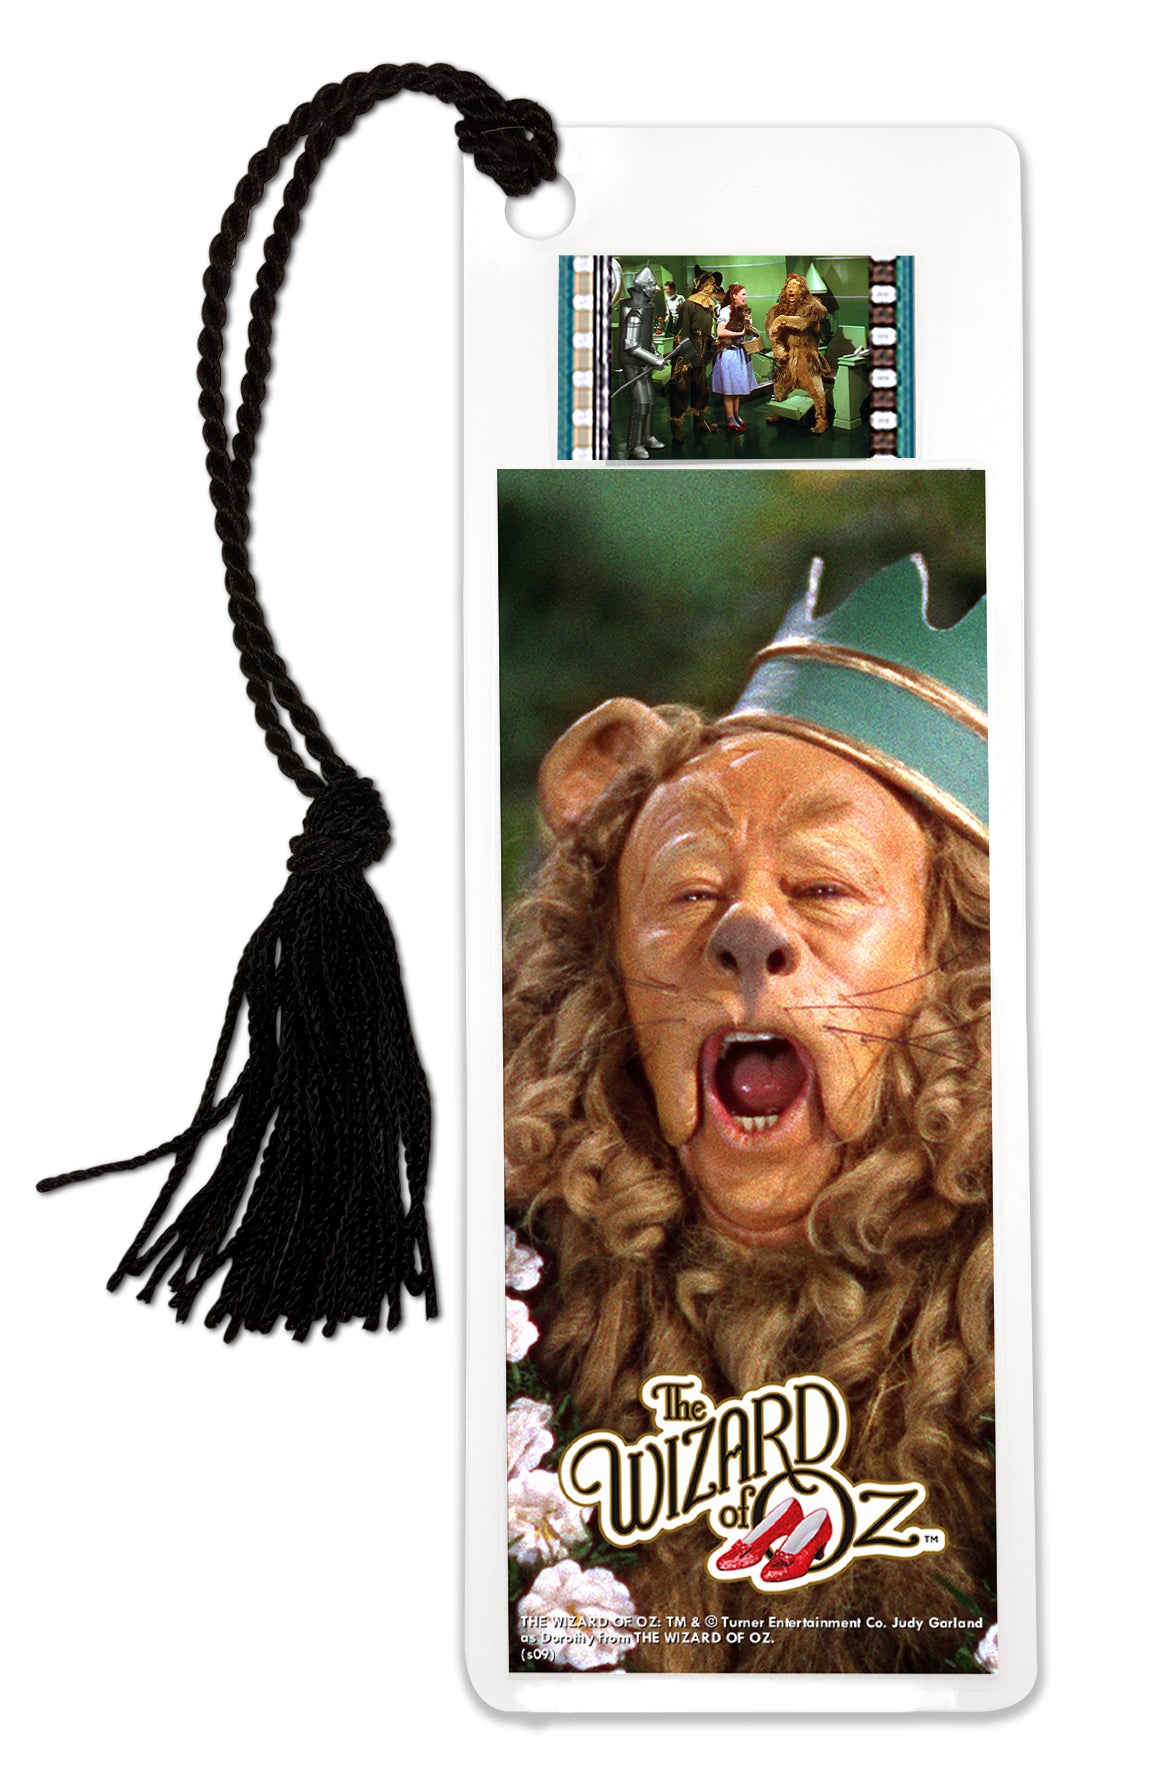 The Wizard of Oz (Cowardly Lion) FilmCells™ Bookmark USBM524